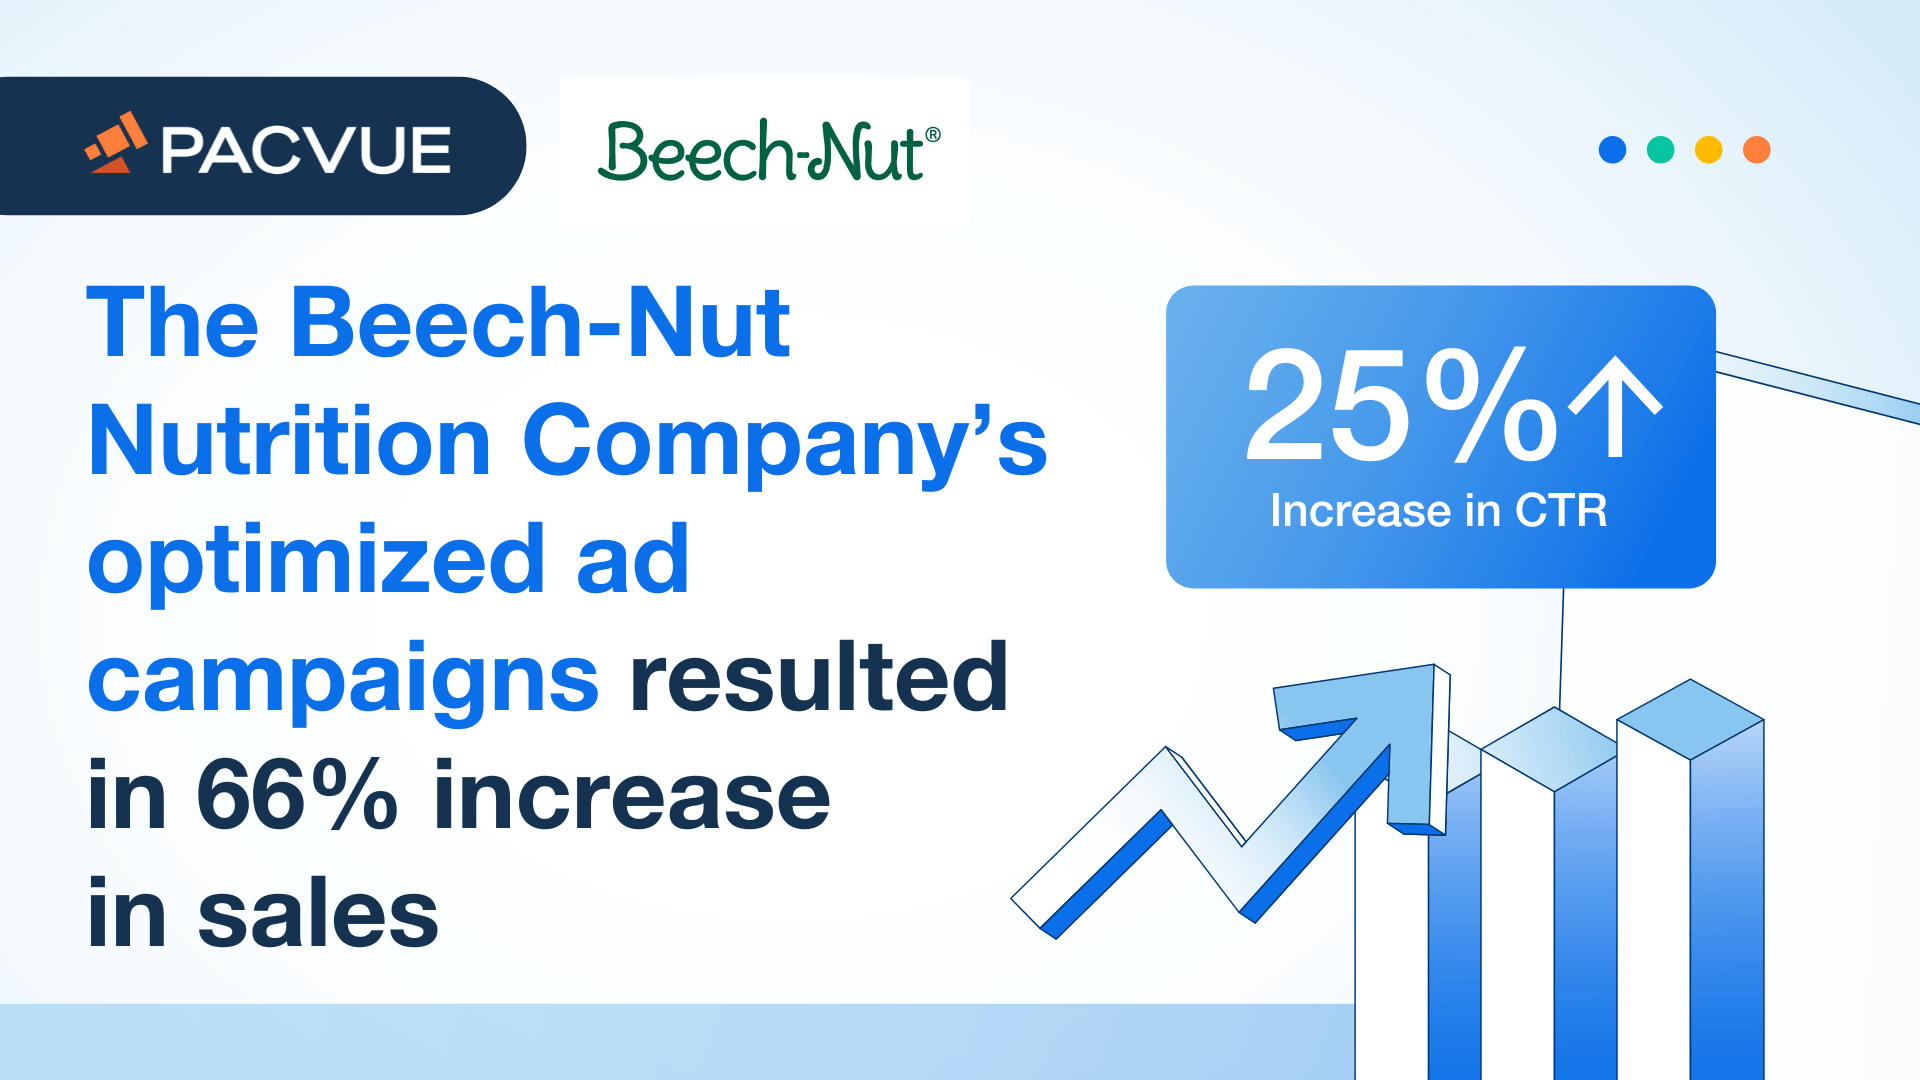 The Beech-Nut Nutrition Company's optimized ad campaigns resulted in 66% increase in sales